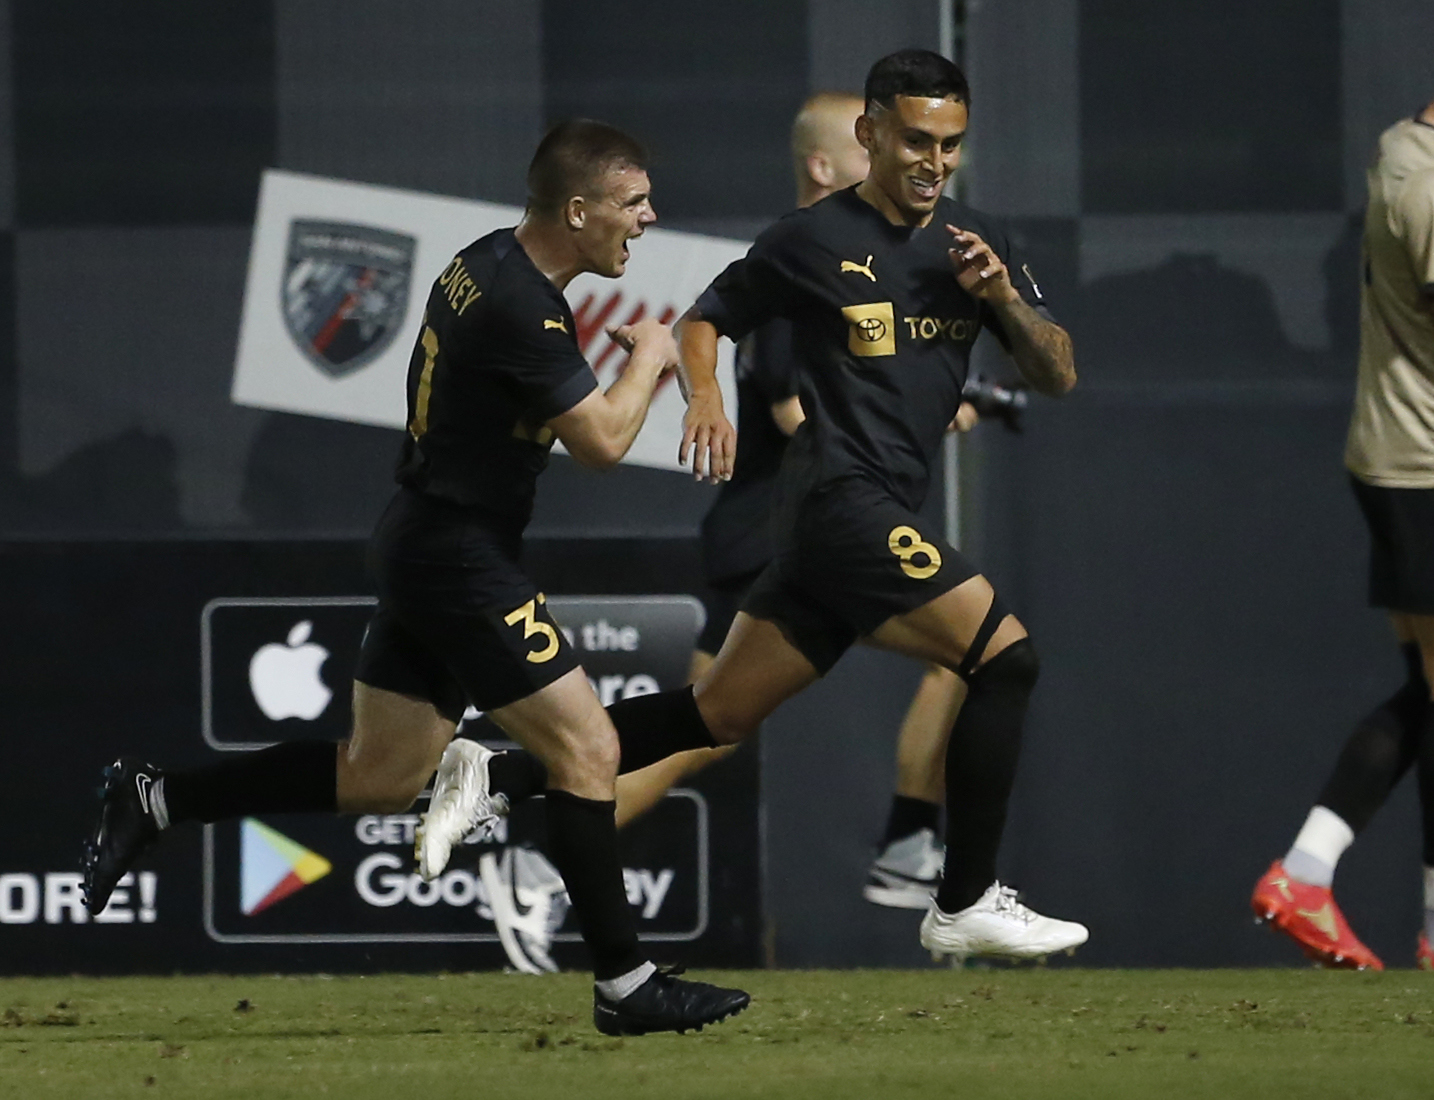 First time for everything: Phoenix Rising FC picks up 1st win in San Antonio